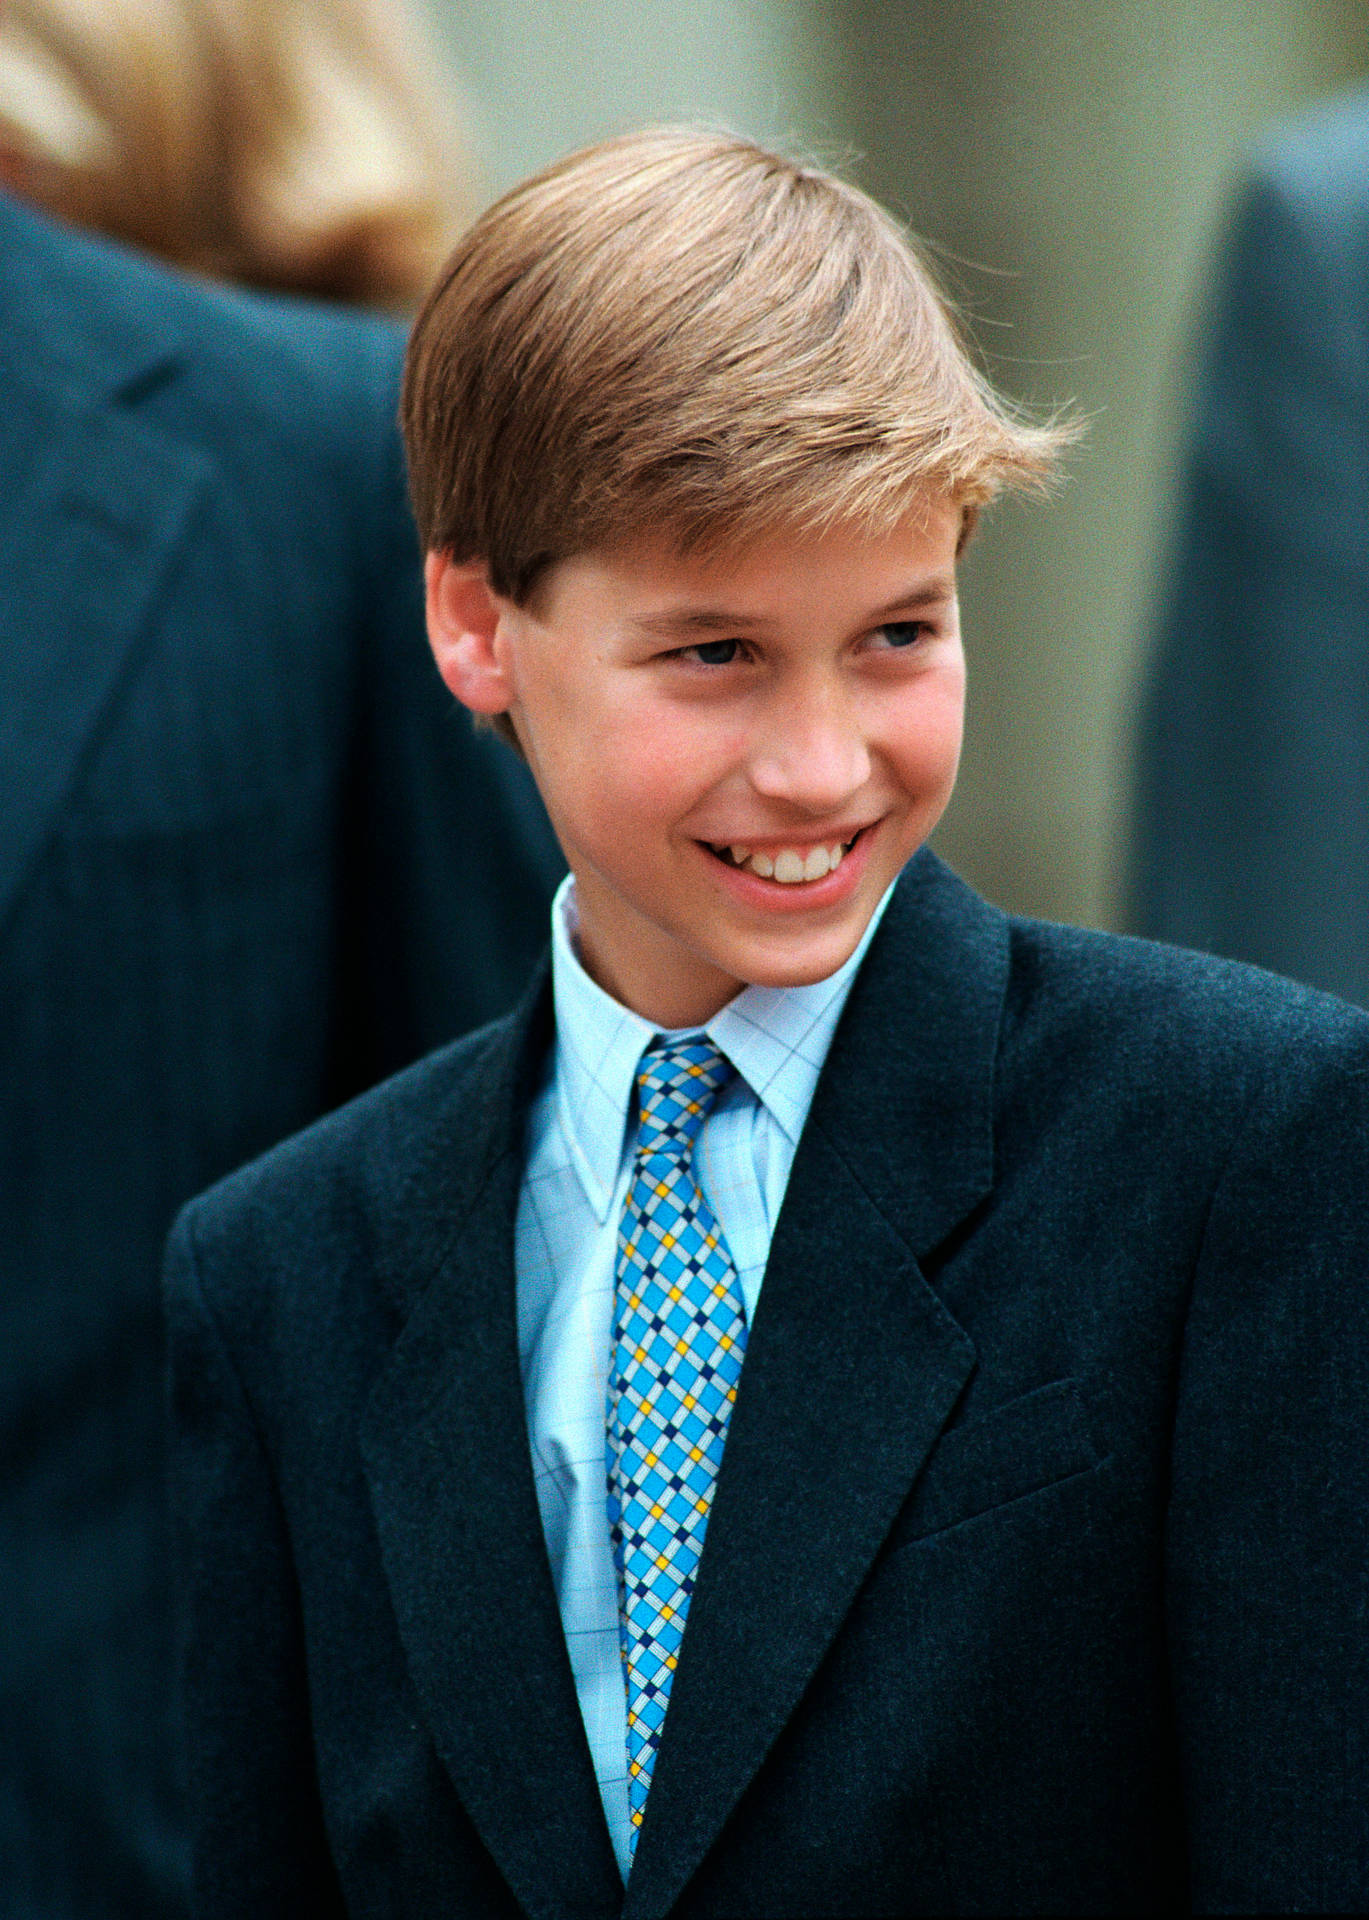 Prince William In A Formal Meeting